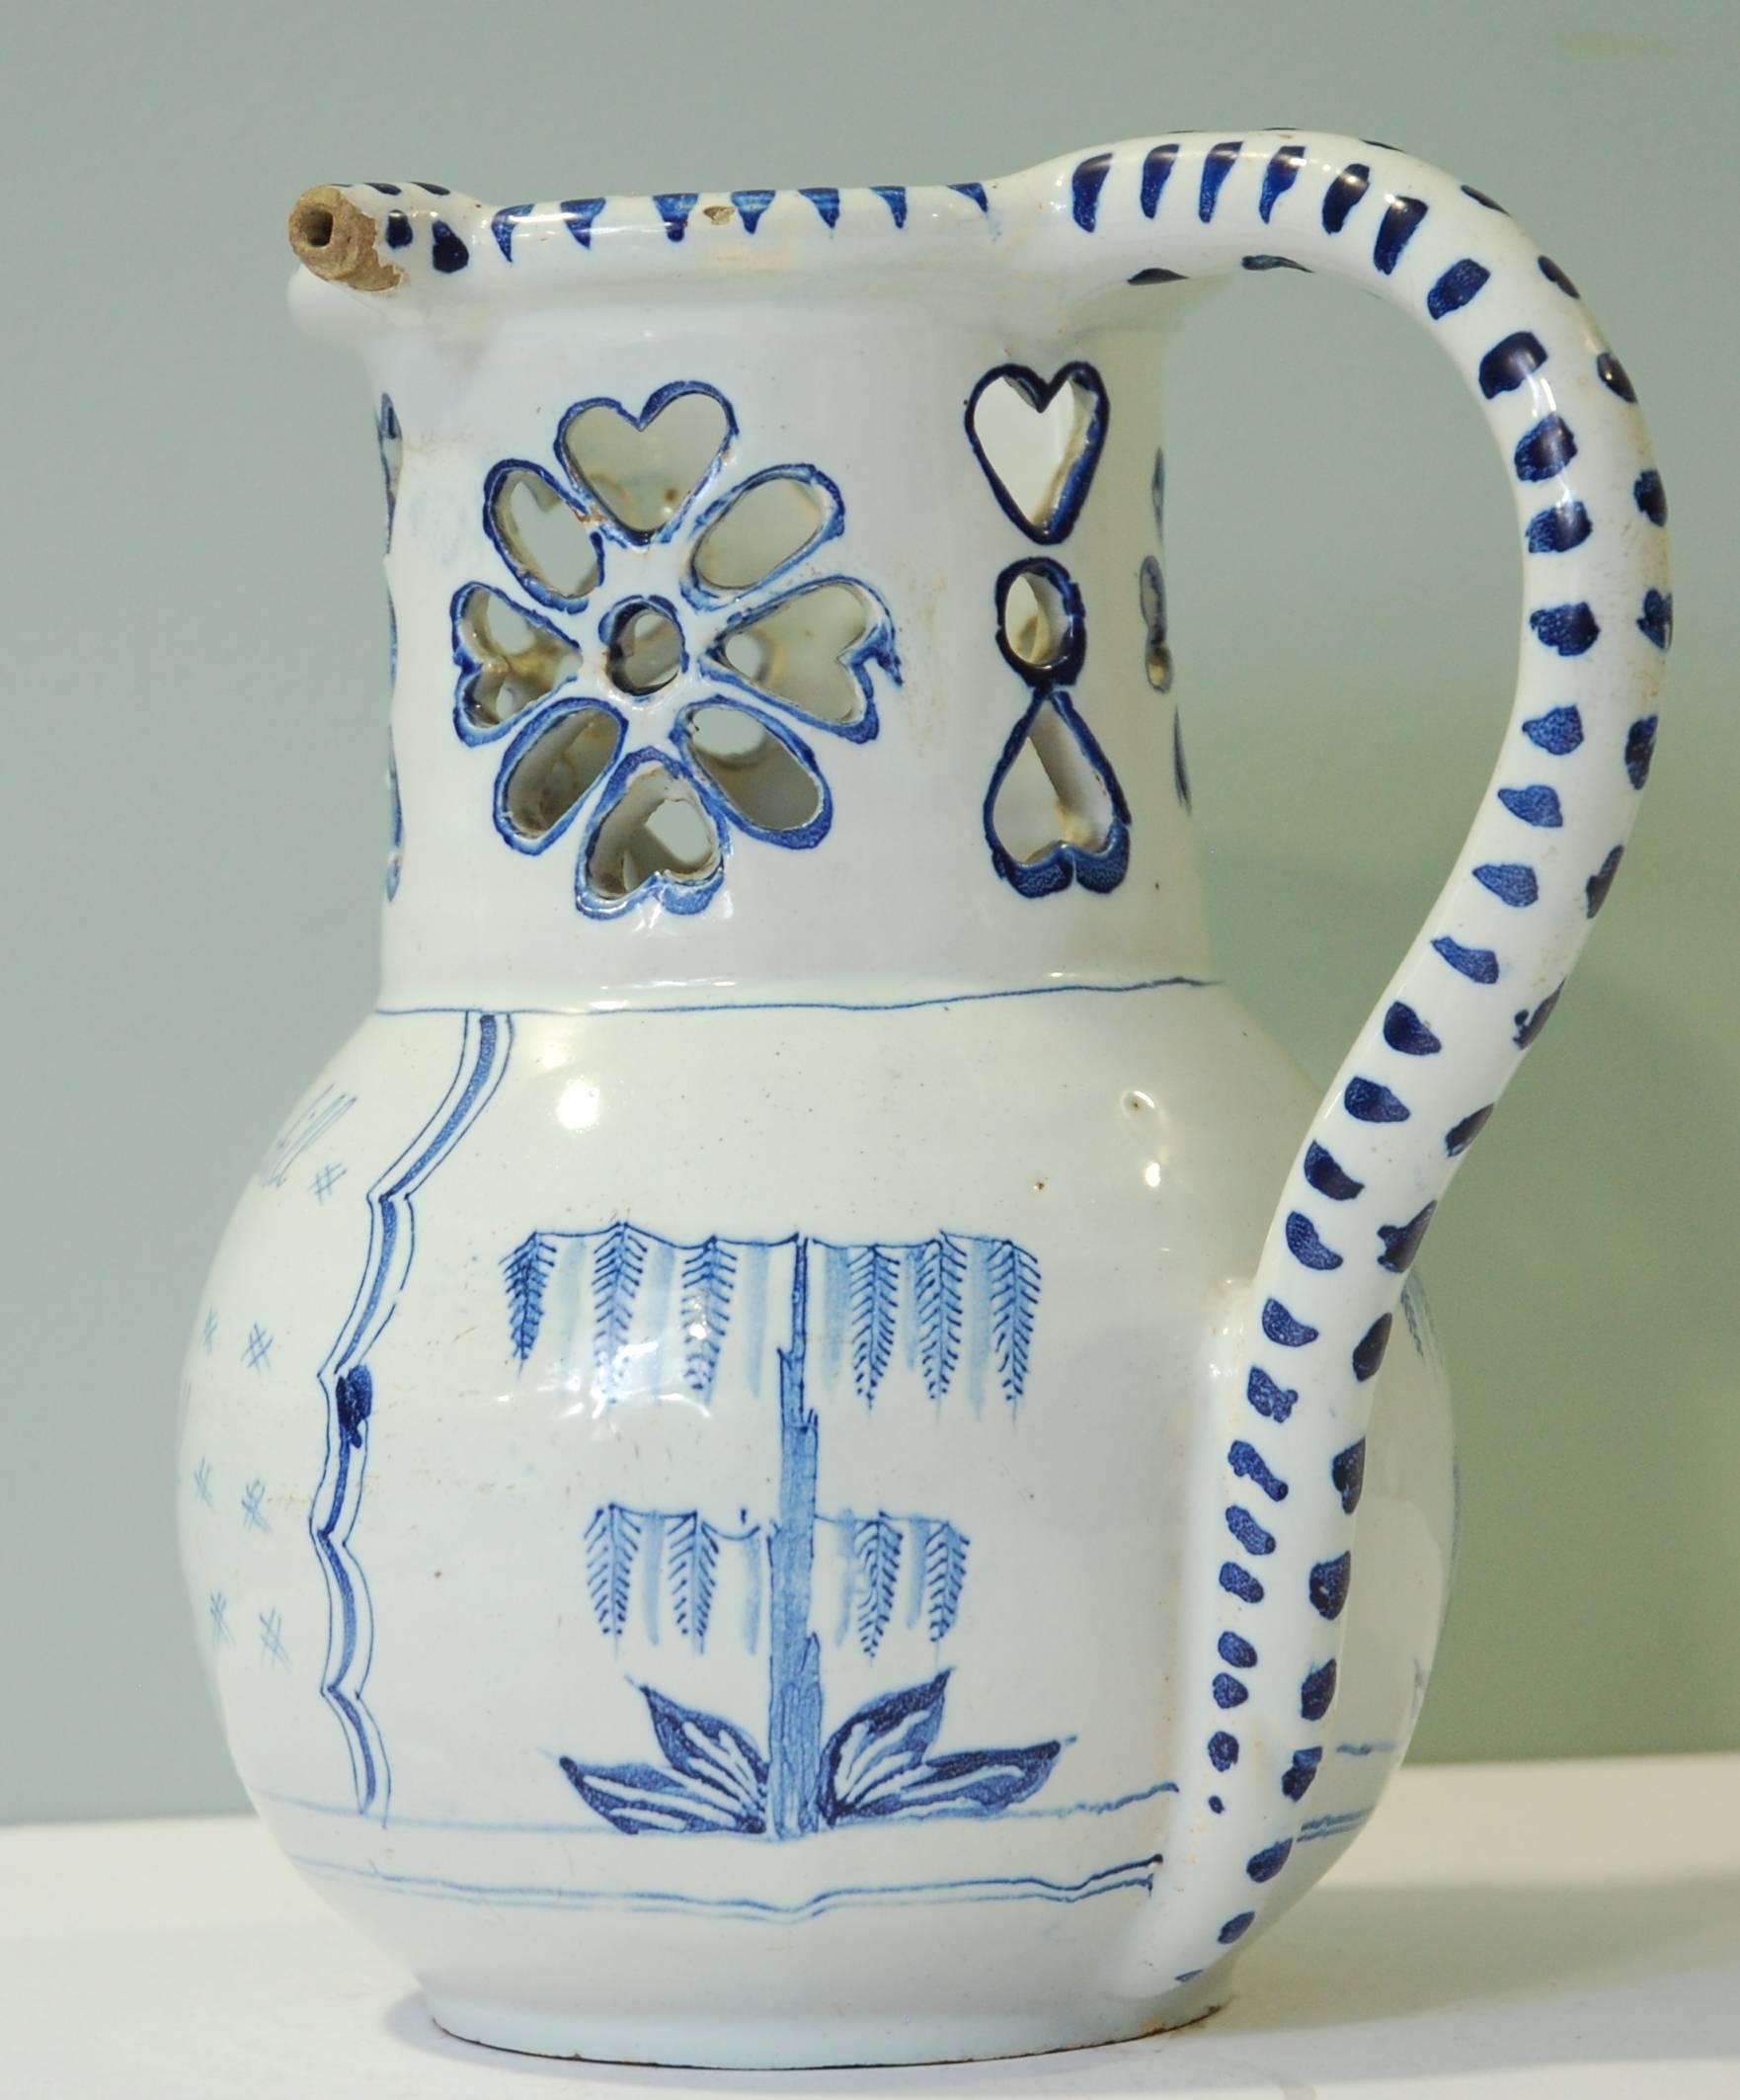 A rare delftware puzzle jug in tin-glazed earthenware, nicely painted with the usual verse. Exceptional condition. Probably Liverpool.

Puzzle jugs were a betting game popular from time to time in English pubs. You would bet someone they could not